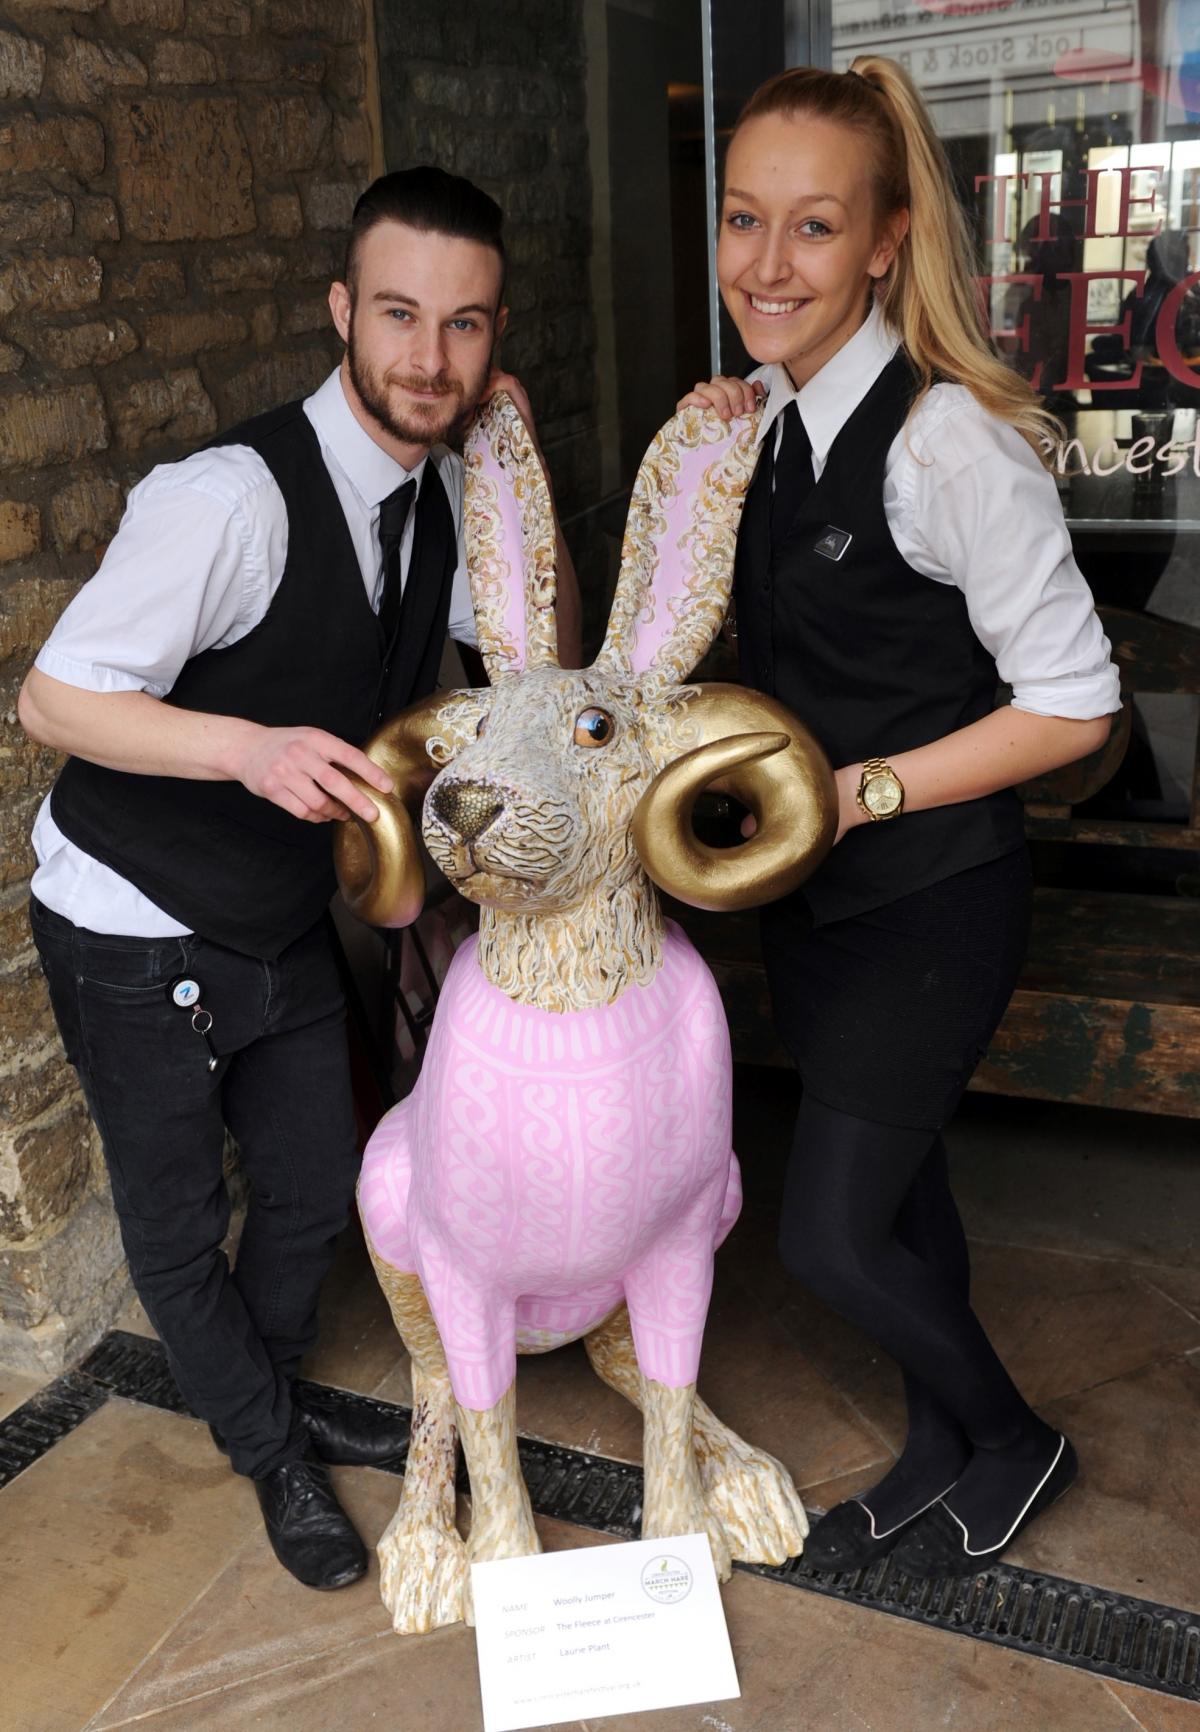 The Fleece staff members Dan Dodson and Emily Jones with Woolly Jumper by Laurie Plant